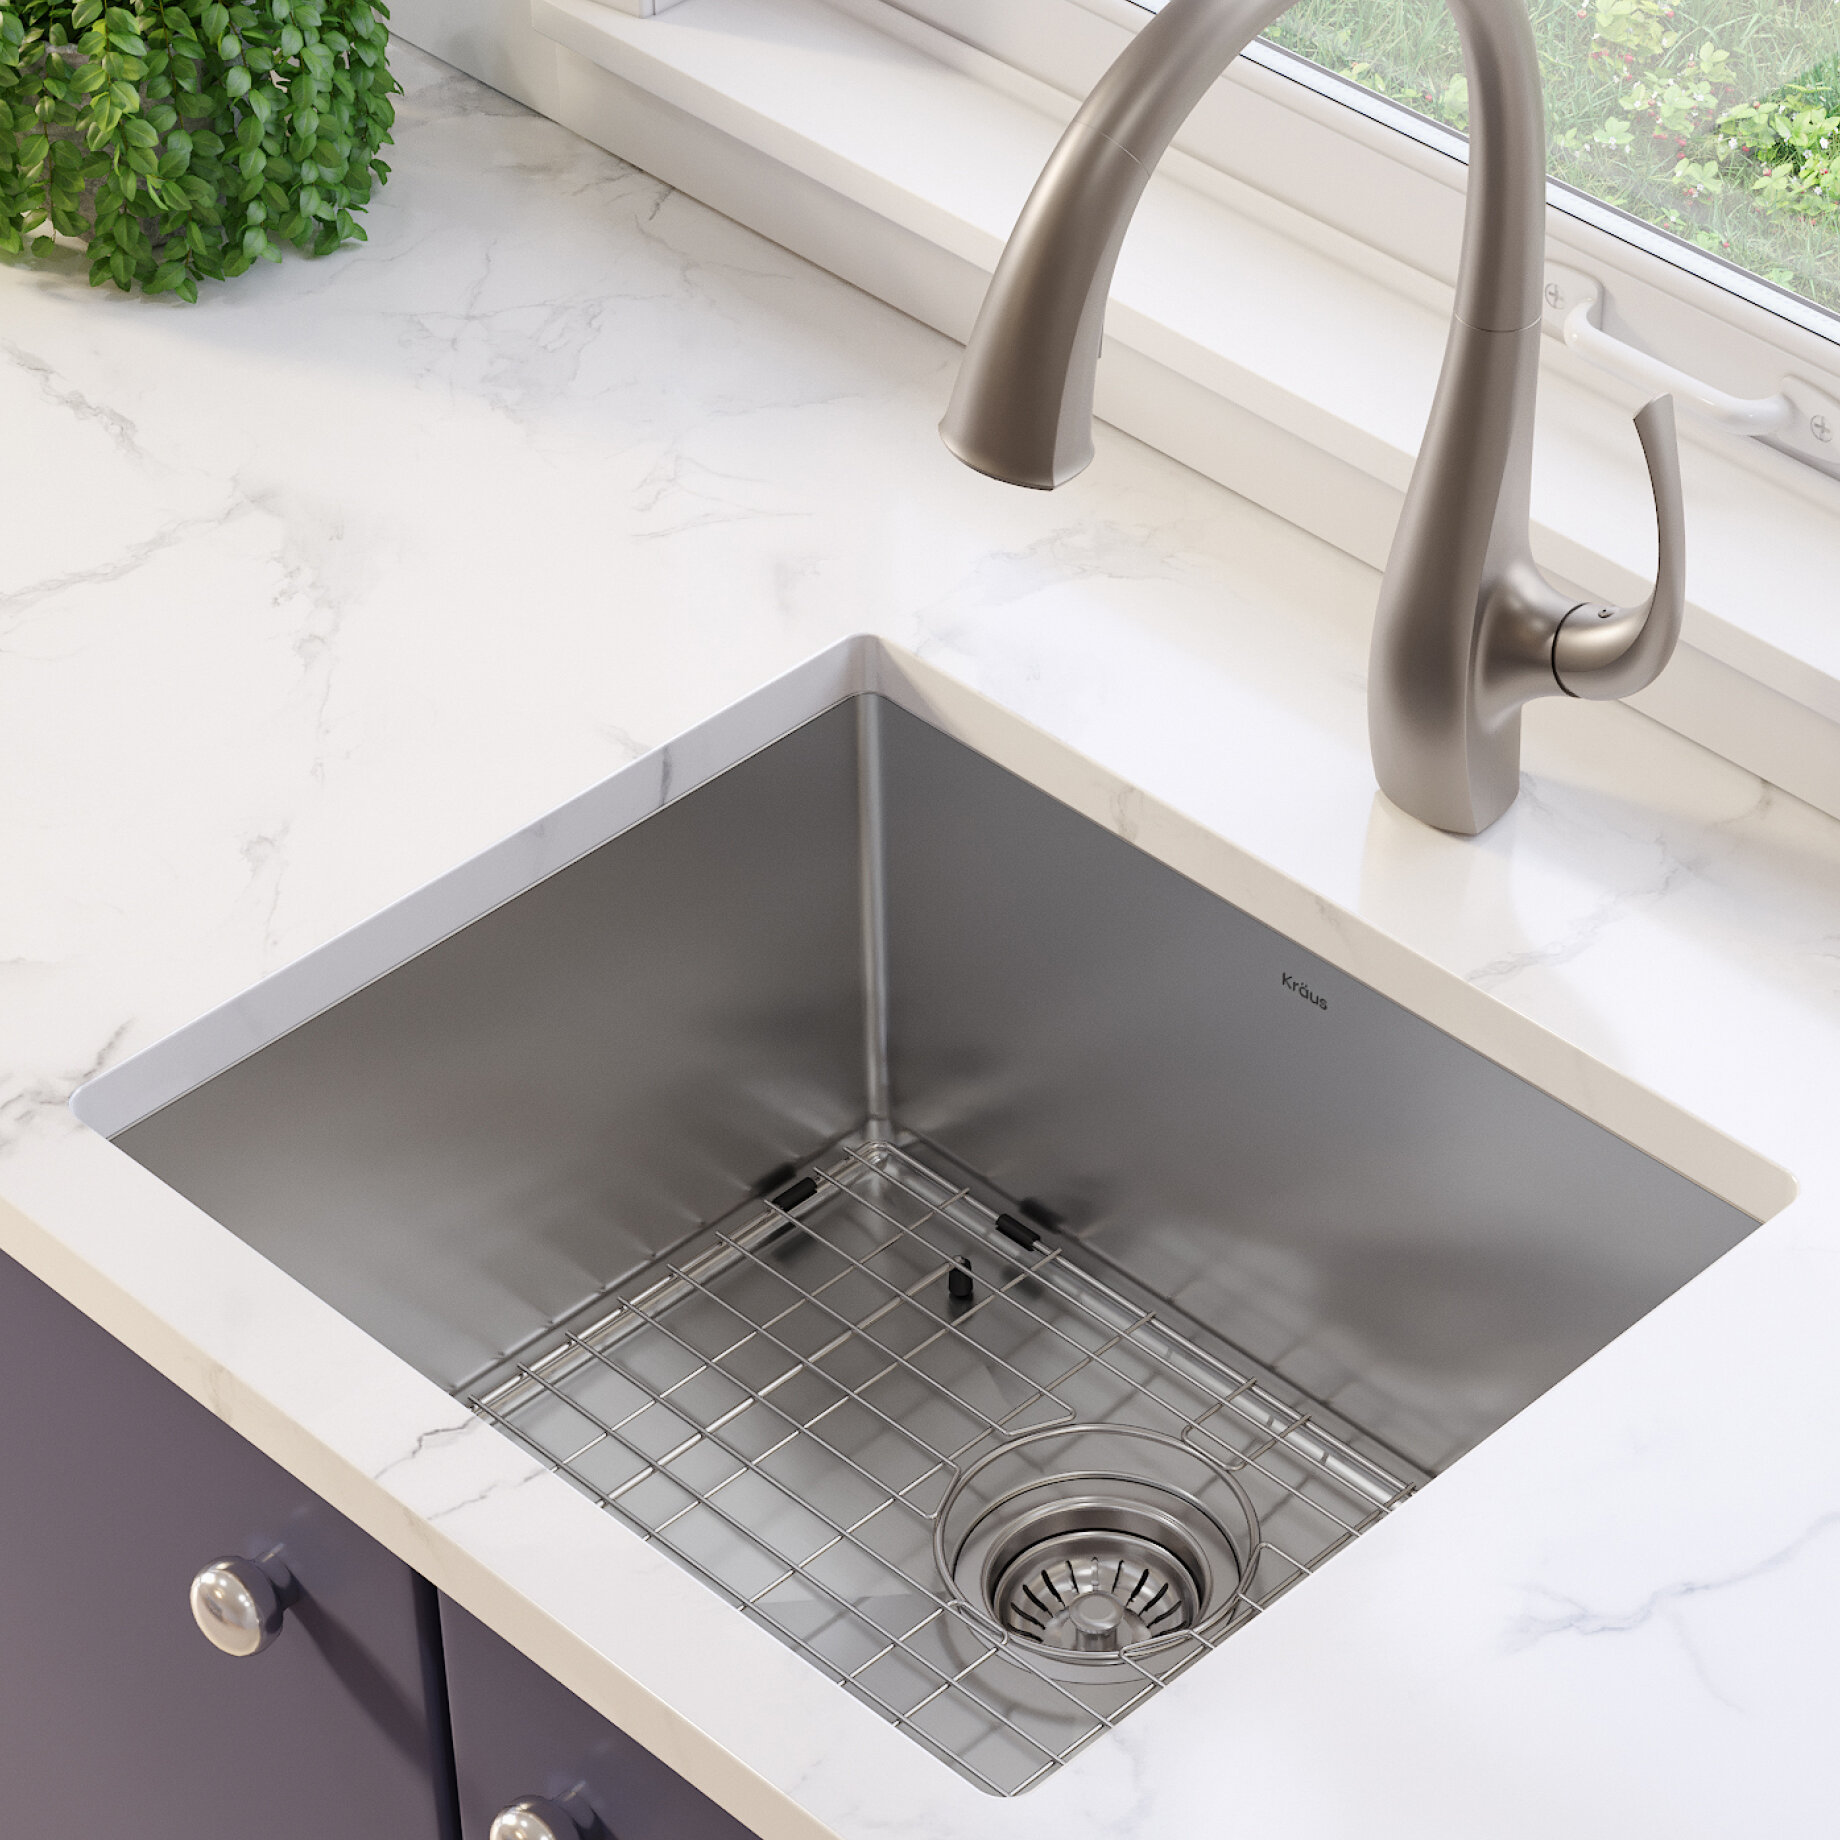 Standart Pro 16 Gauge 21 X 18 Undermount Kitchen Sink With Bottom Grid Drain Assembly And Drain Cap